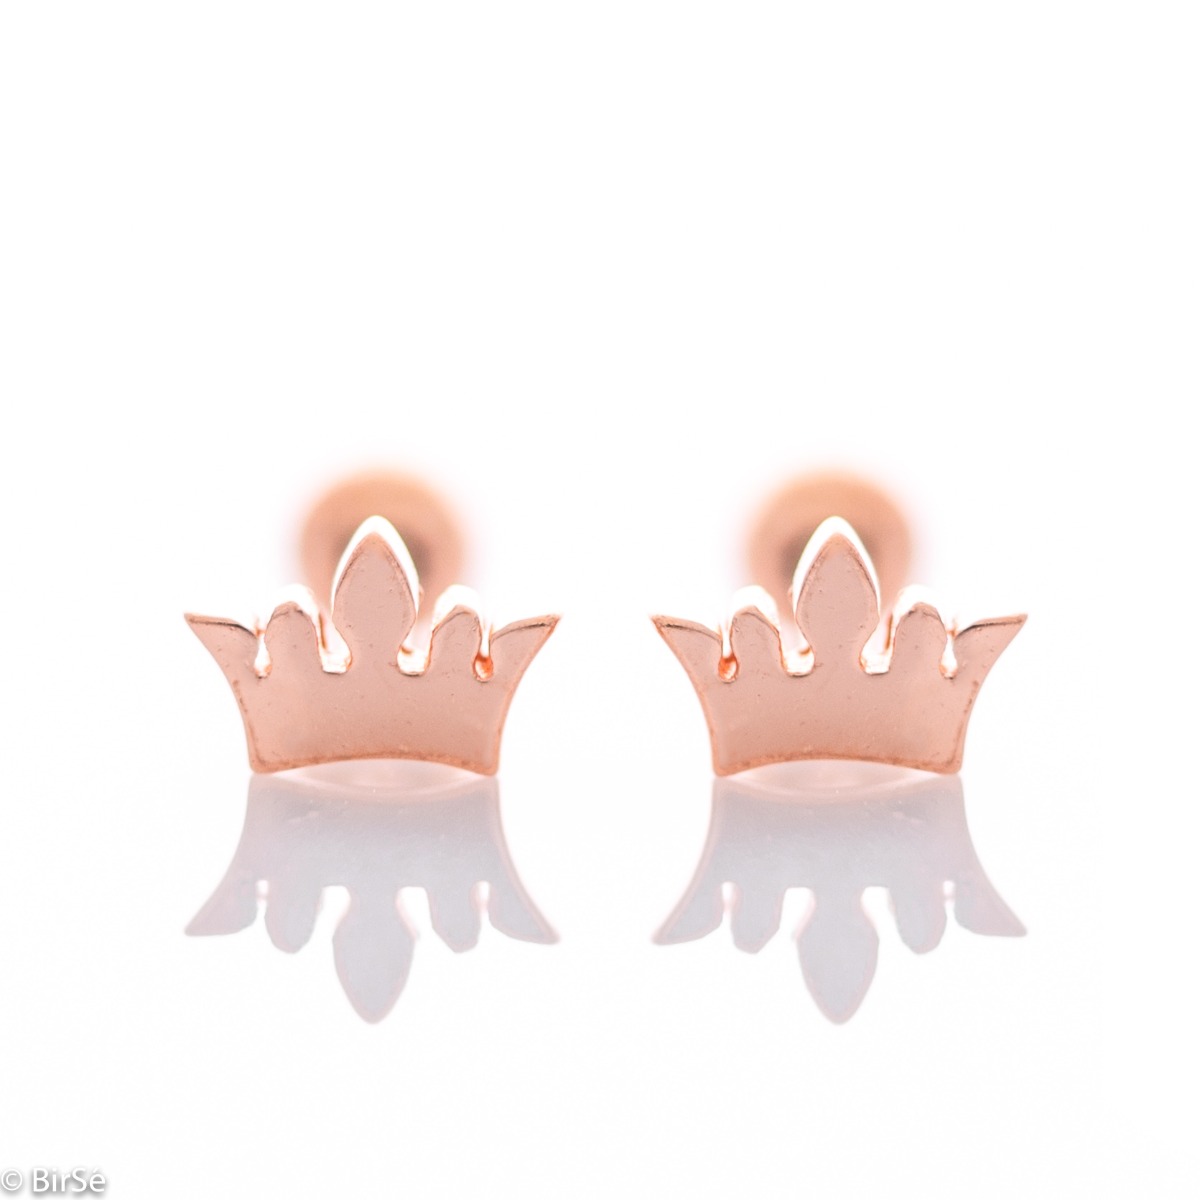 
Rose Silver Earrings with Crown Shape
